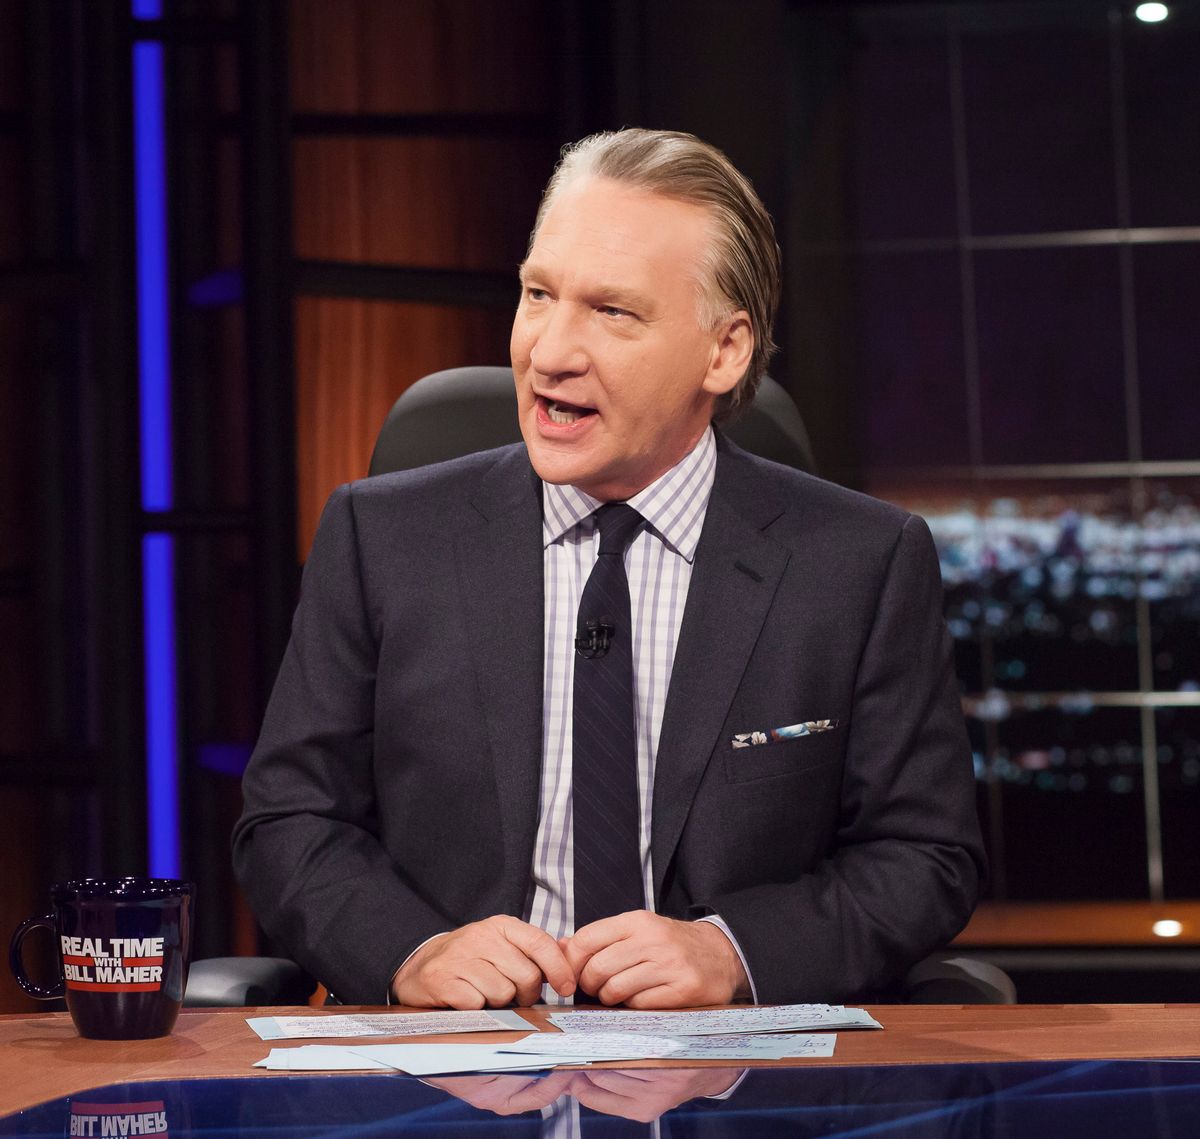 This April 8, 2016 photo released by HBO shows Bill Maher, host of "Real Time with Bill Maher," during a broadcast of the show in Los Angeles. Since premiering 13 years ago, Maher has provided an essential forum for smart discussion about politics and culture, with his opening monologue often the sharpest, best-crafted topical humor on television. (Janet Van Ham/HBO via AP) (AP)